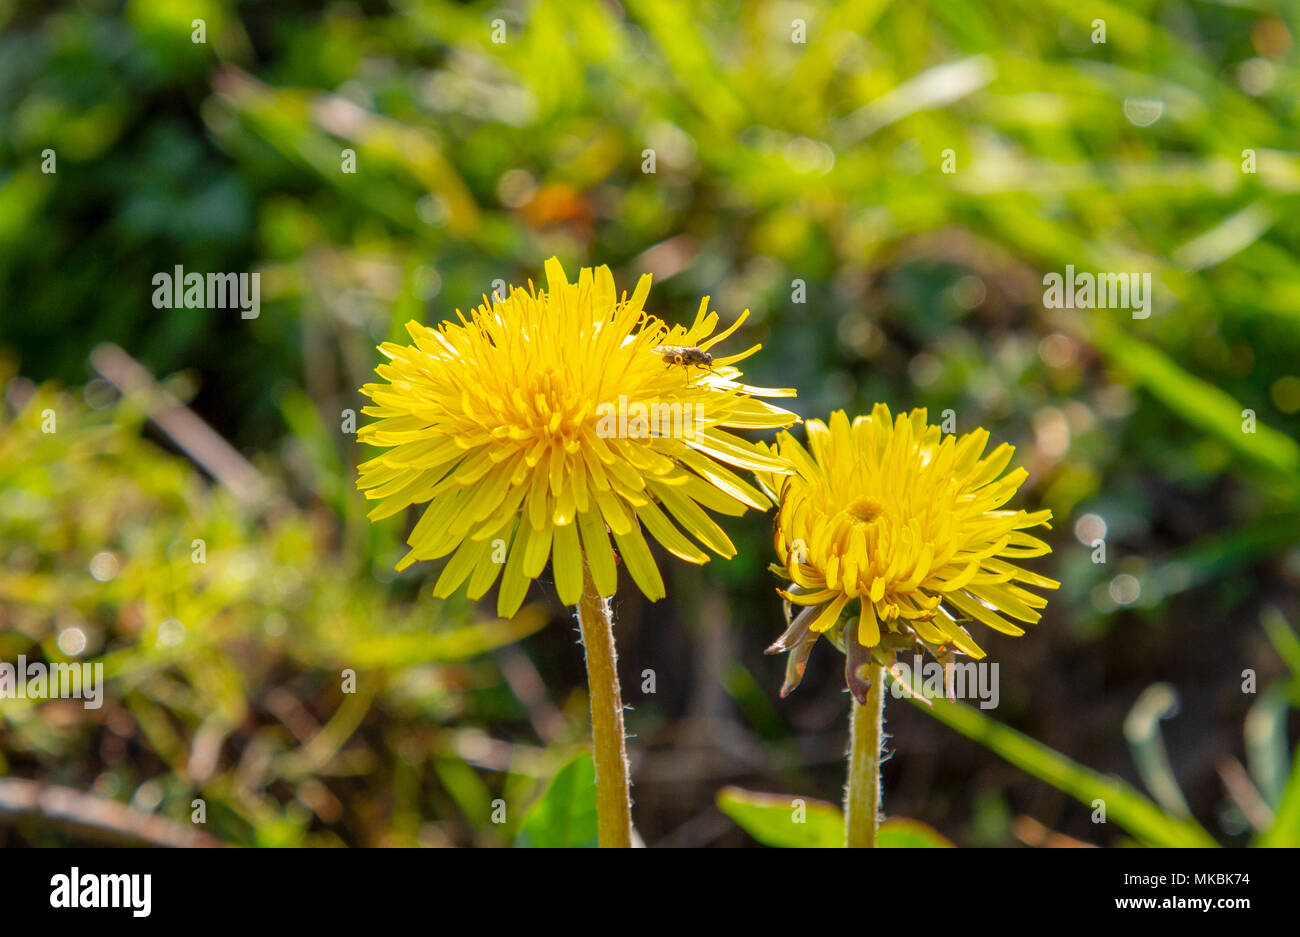 Insect on Dandelion head Stock Photo